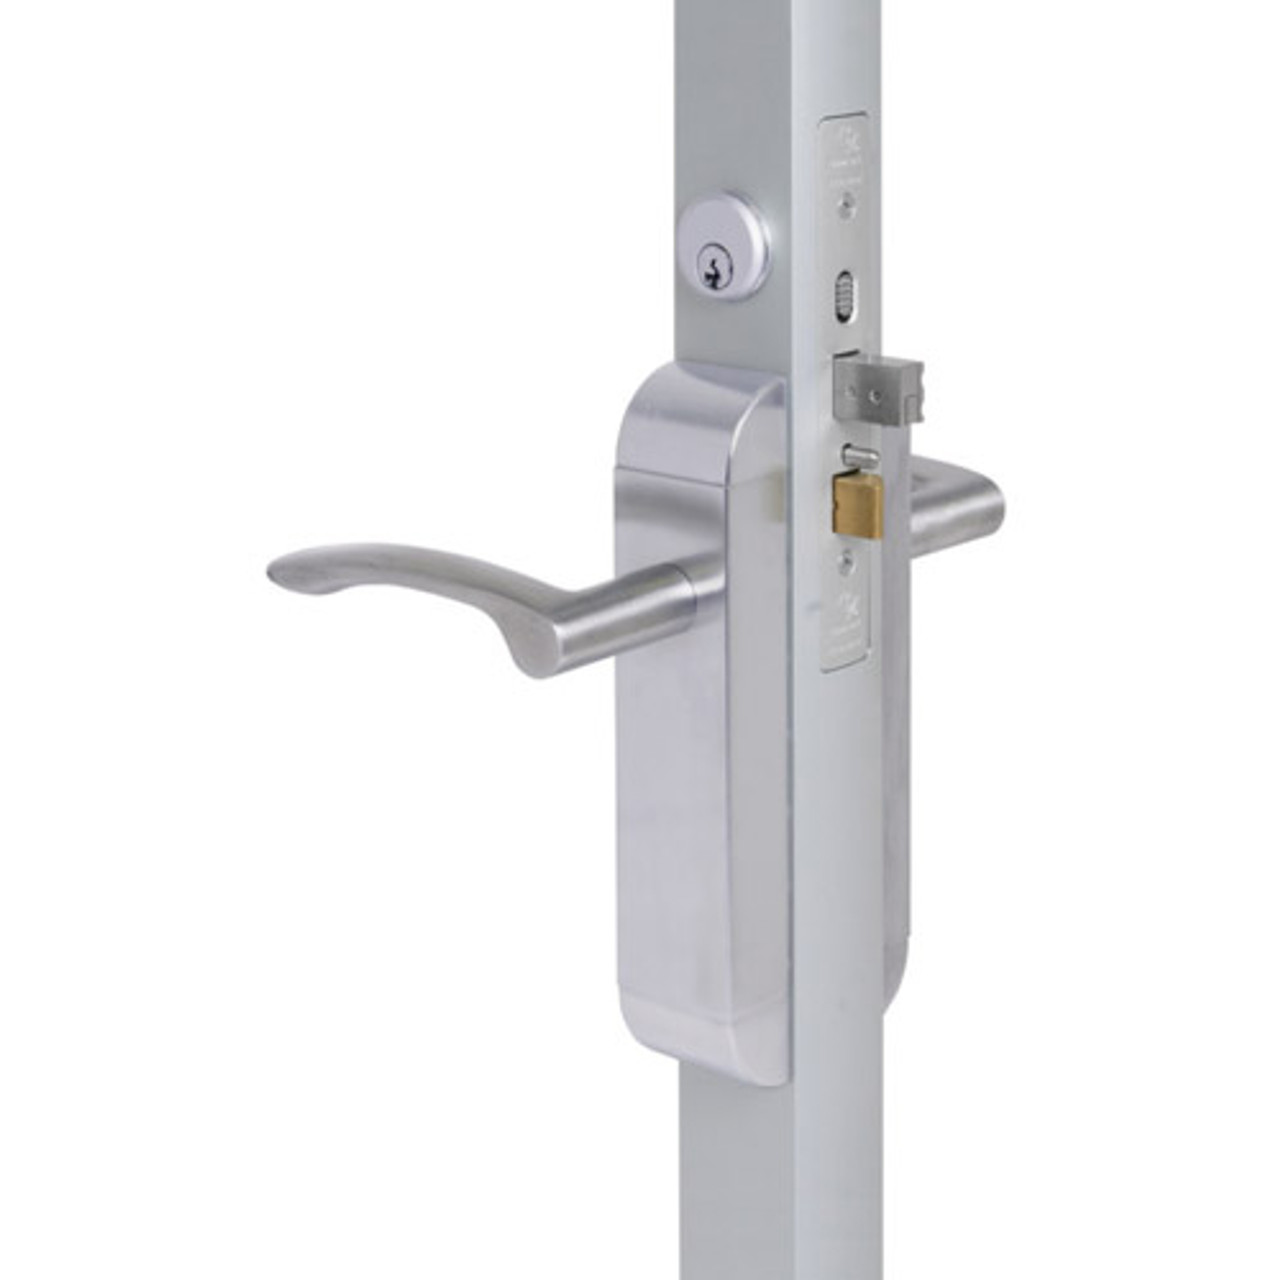 2190-321-303-32 Adams Rite Dual Force Interconnected 2190 series Deadlock/Deadlatch in Bright Stainless